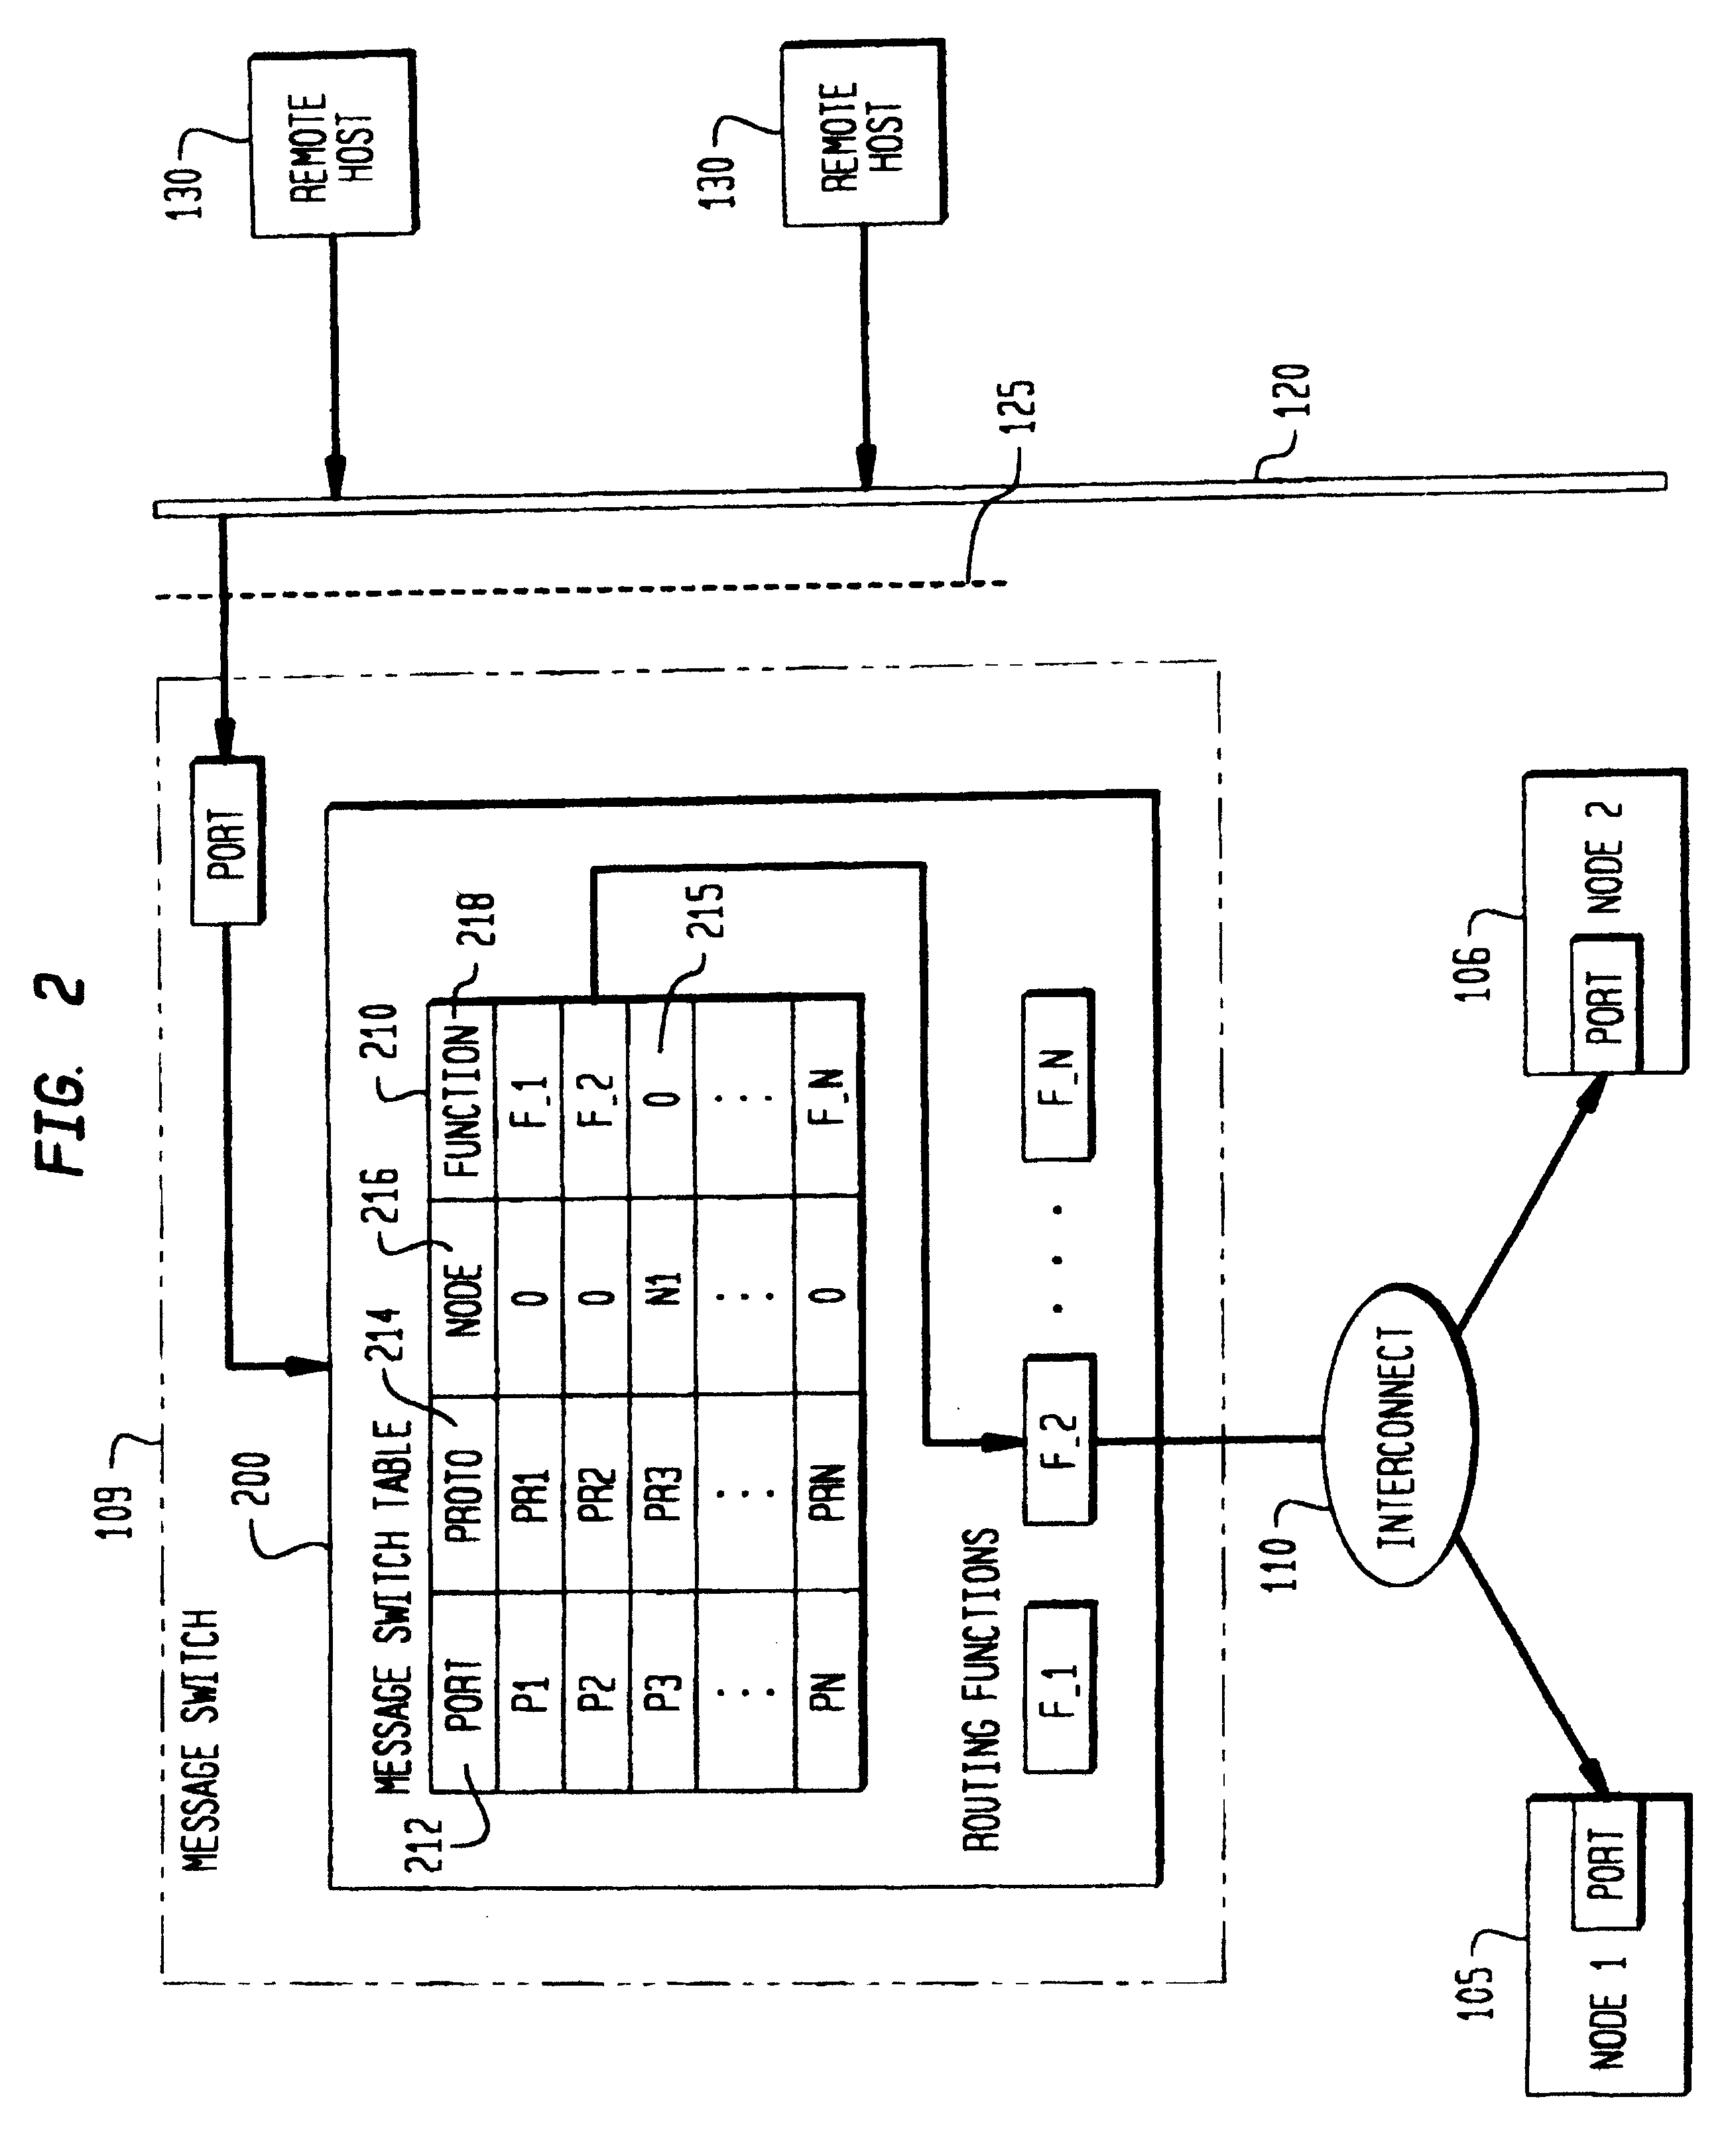 System and method for providing dynamically alterable computer clusters for message routing